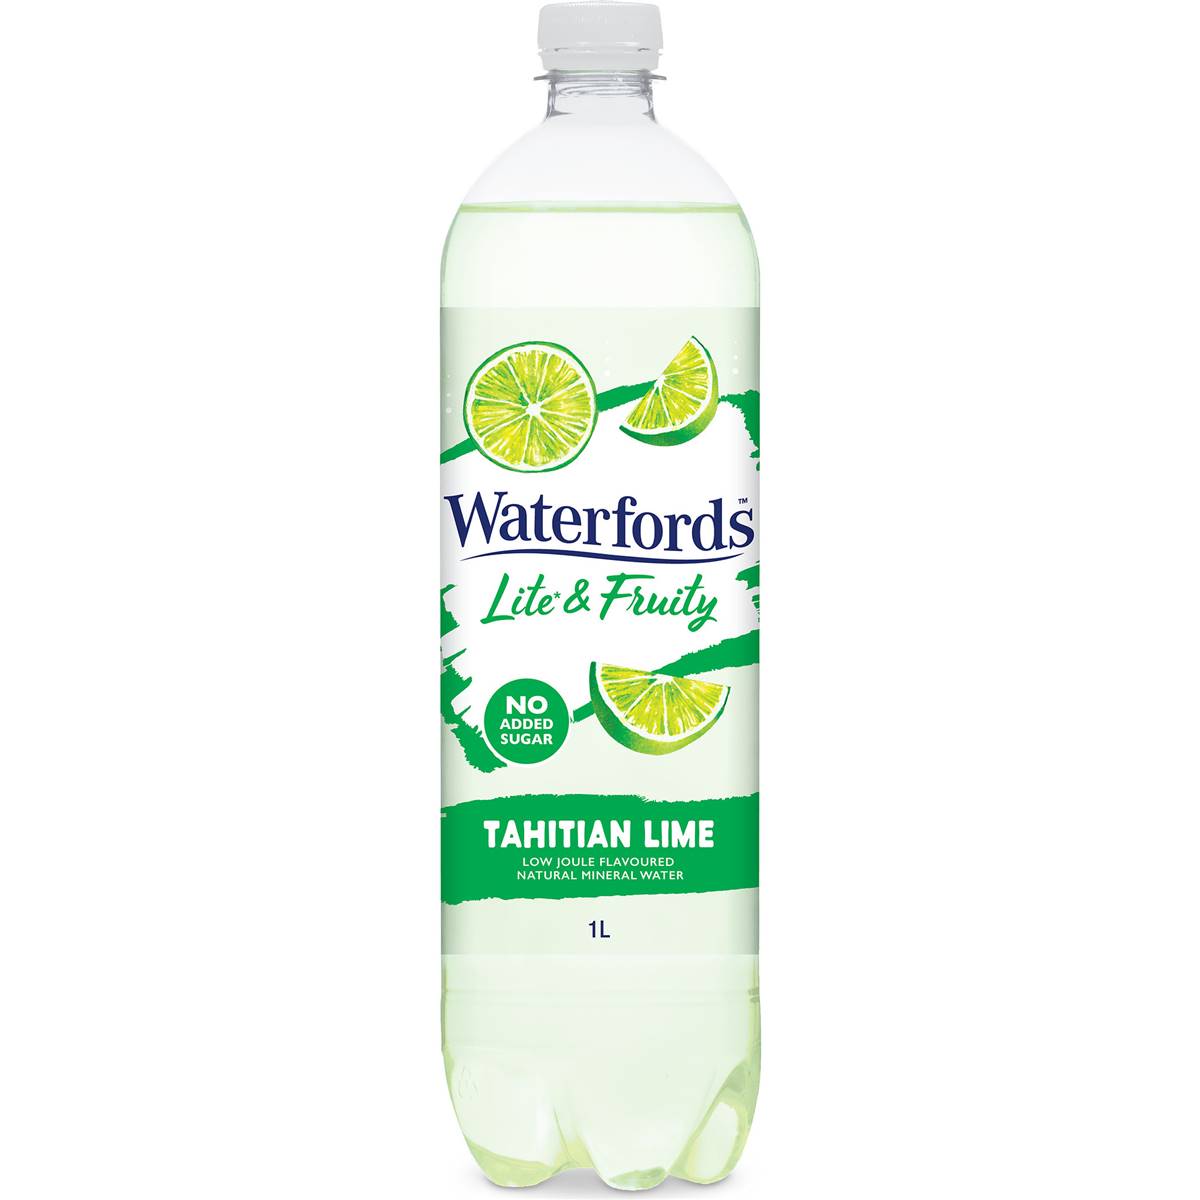 Waterfords Mineral Water Tahitian Lime
